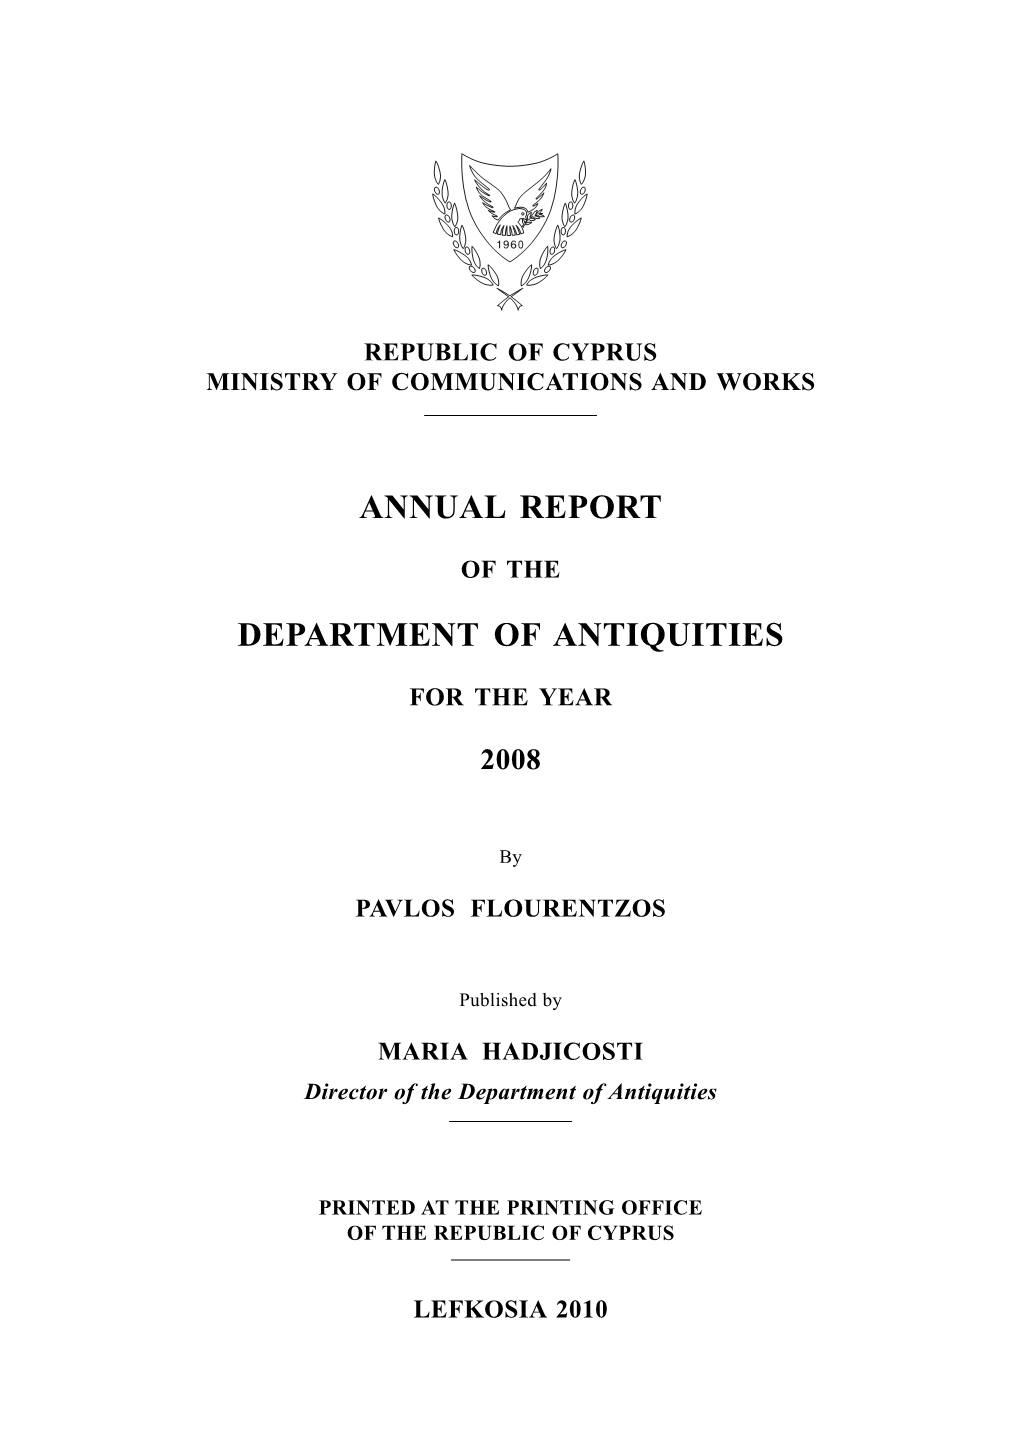 Annual Report of the Department of Antiquities for the Year 2008